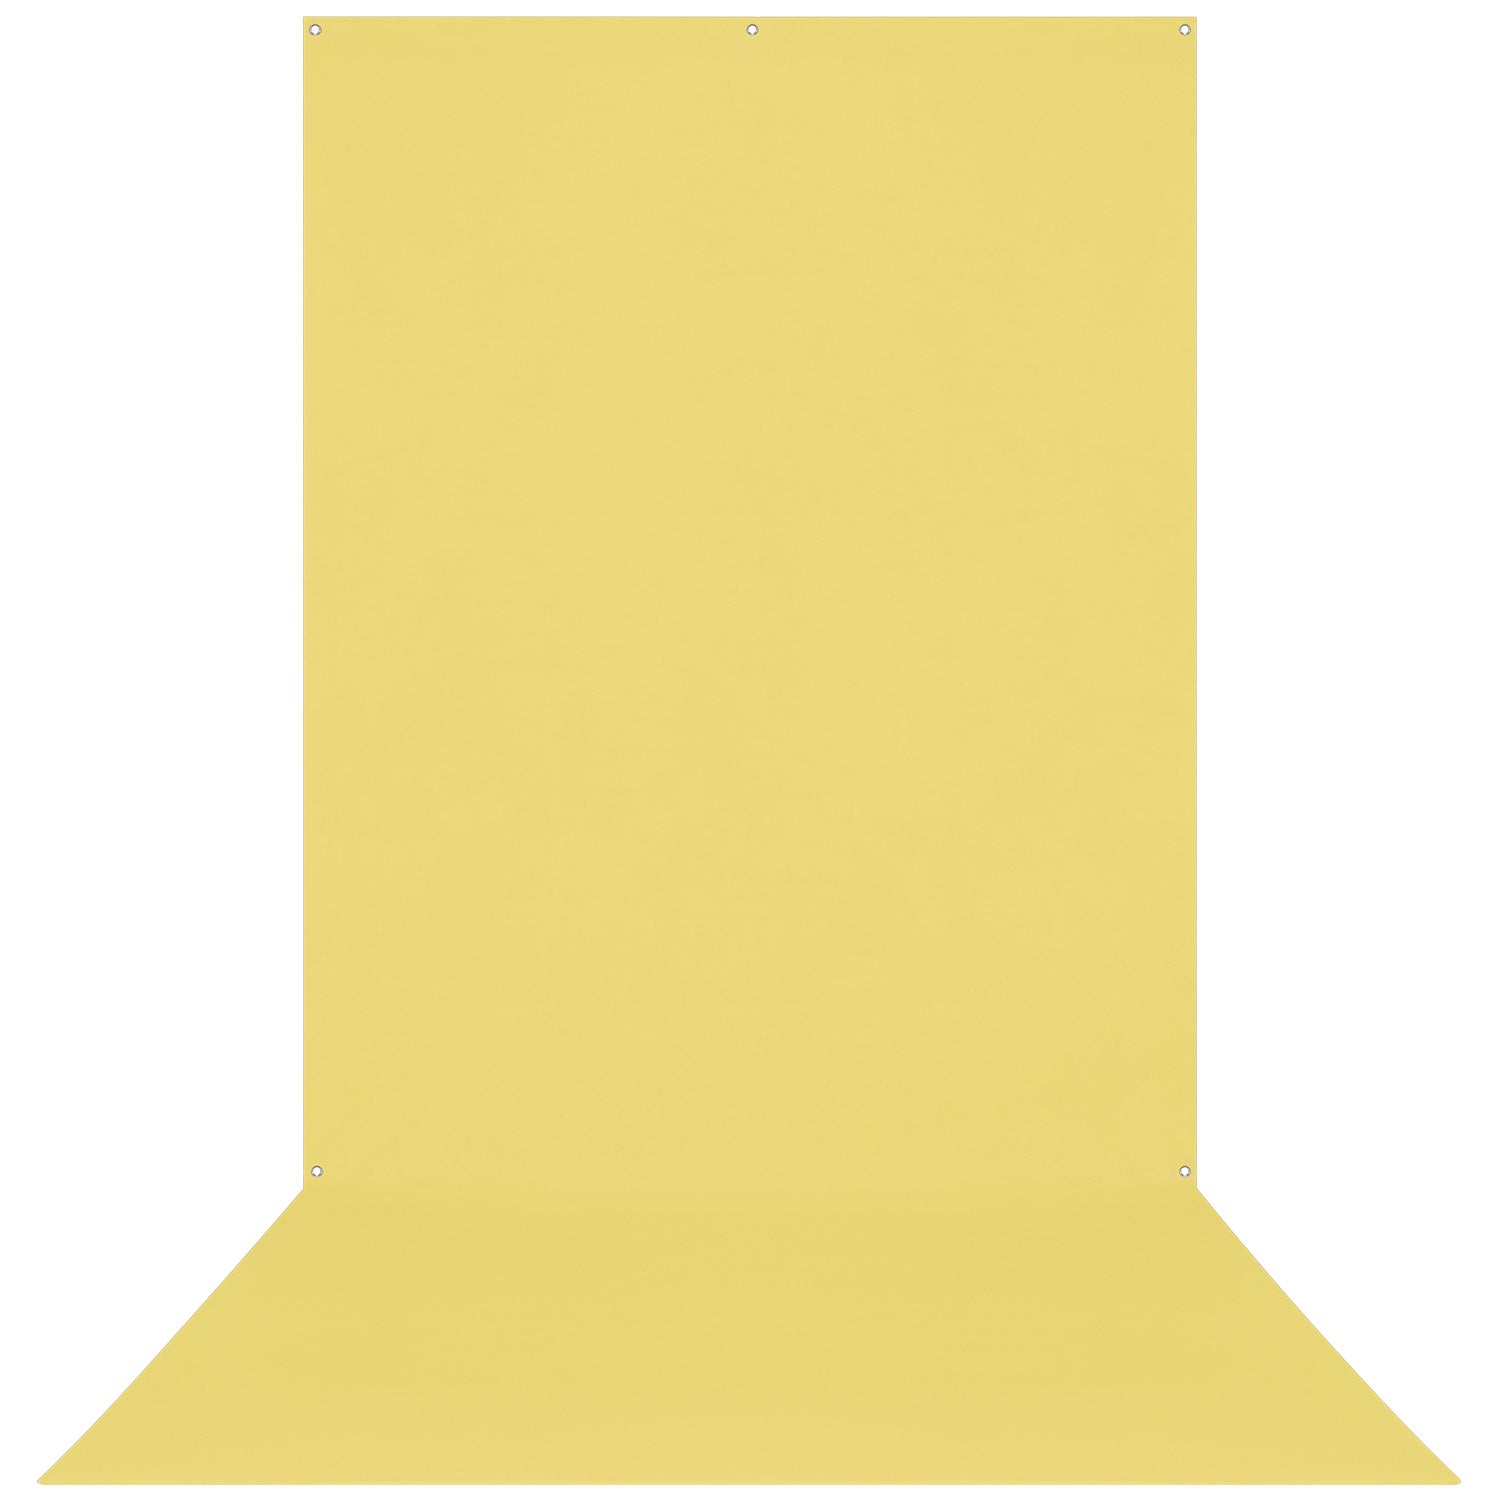 X-Drop Wrinkle-Resistant Backdrop - Canary Yellow (5' x 12')